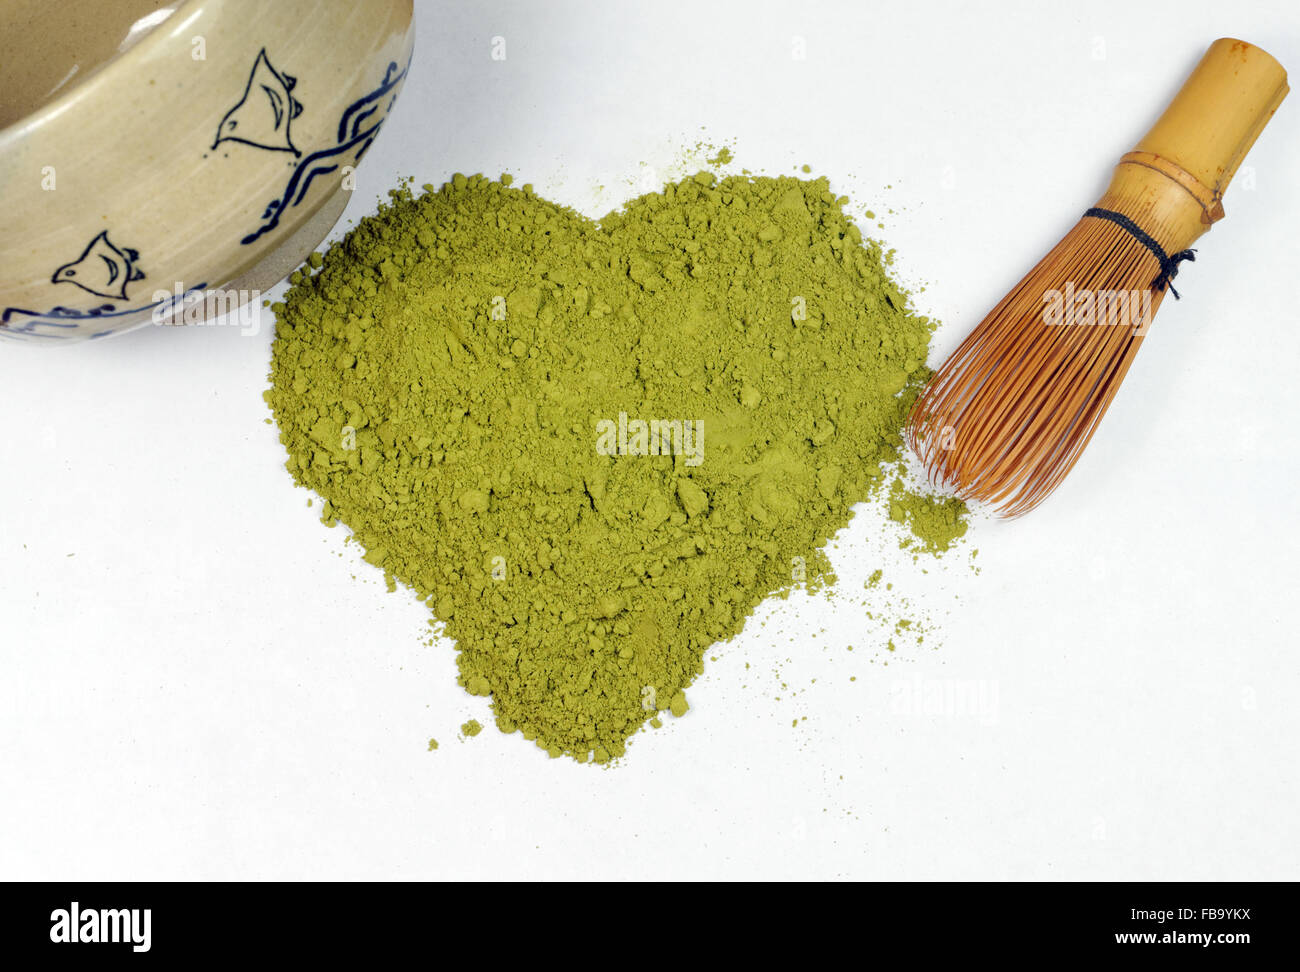 Matcha tea in the shape of a heart, with Chawan tea bowl and Chasen Whisk. Stock Photo